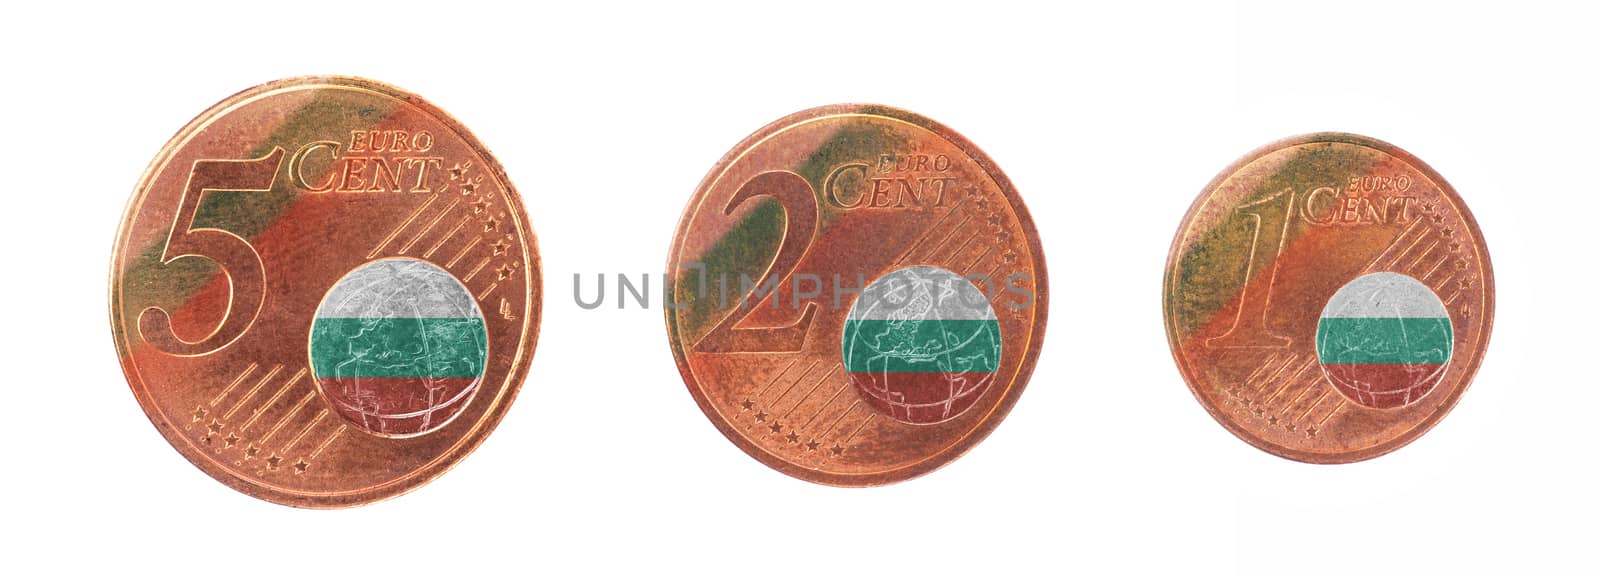 European union concept - 1, 2 and 5 eurocent by michaklootwijk